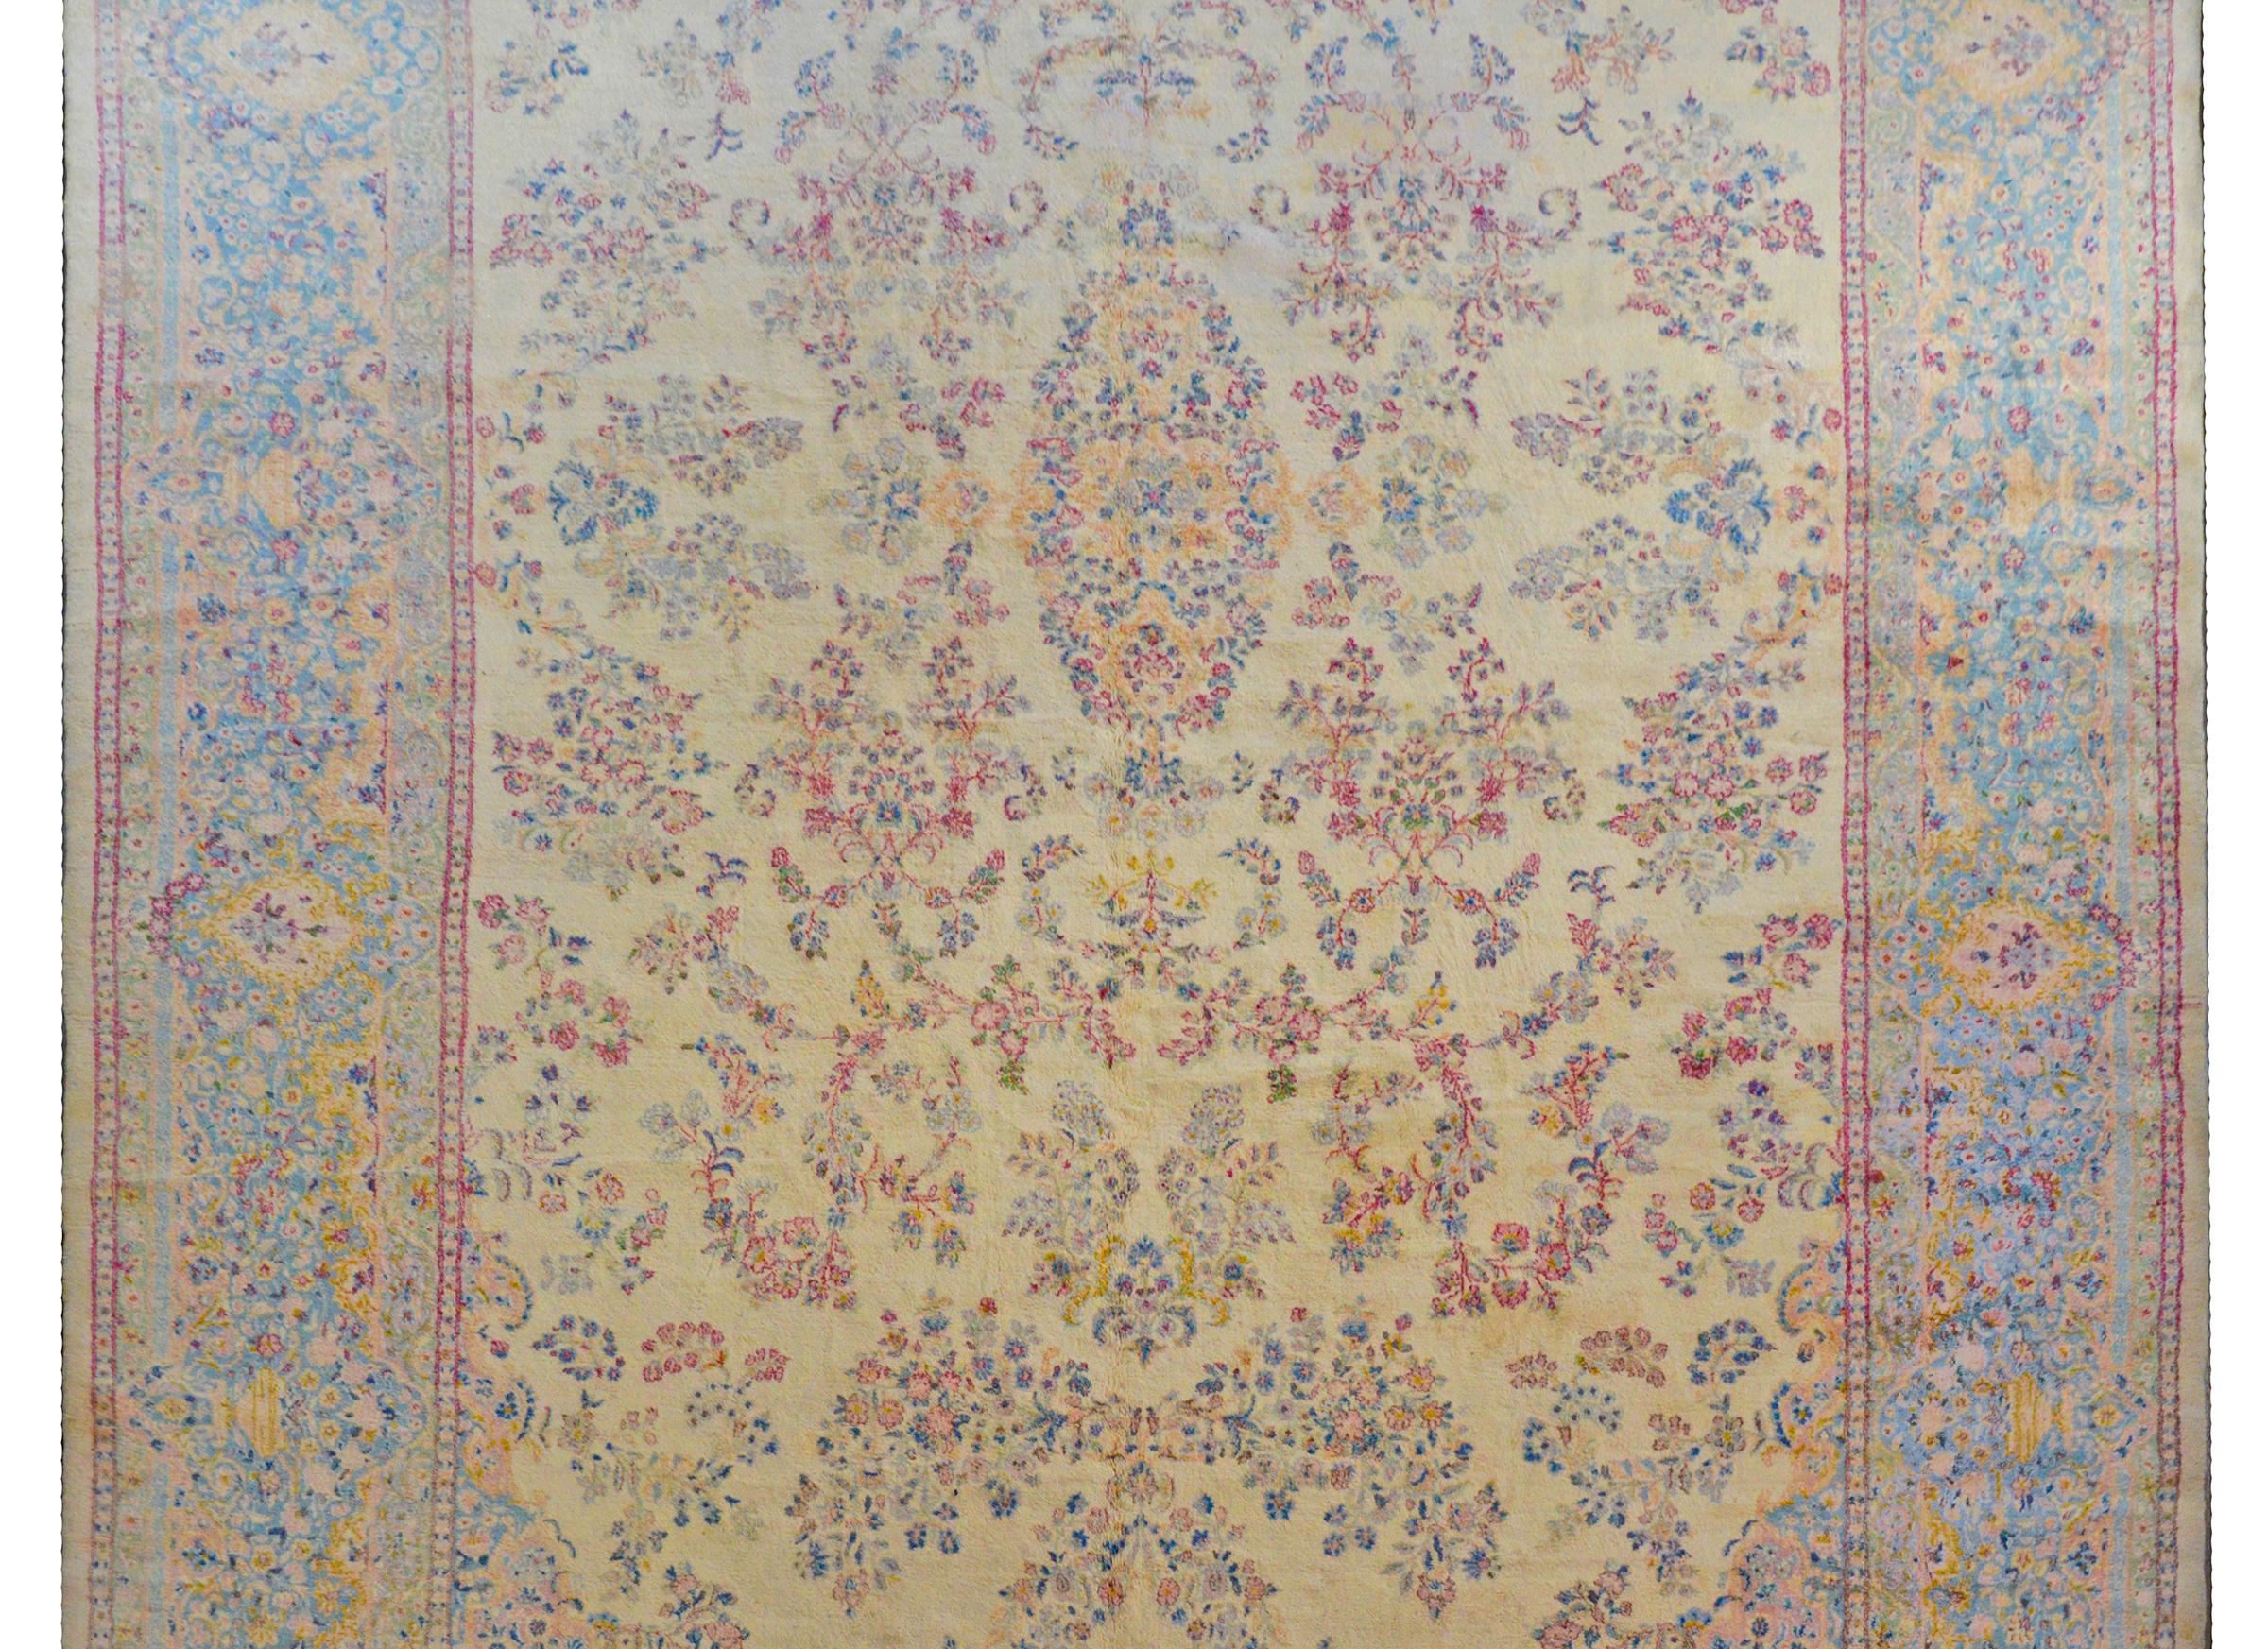 A massive early 20th century Persian Kirman rug with a wonderful all-over floral and leaf pattern woven in pink, light indigo, gold, pale green, all on a pale yellow background. The border is typical with a similarly patterned central stripe flanked